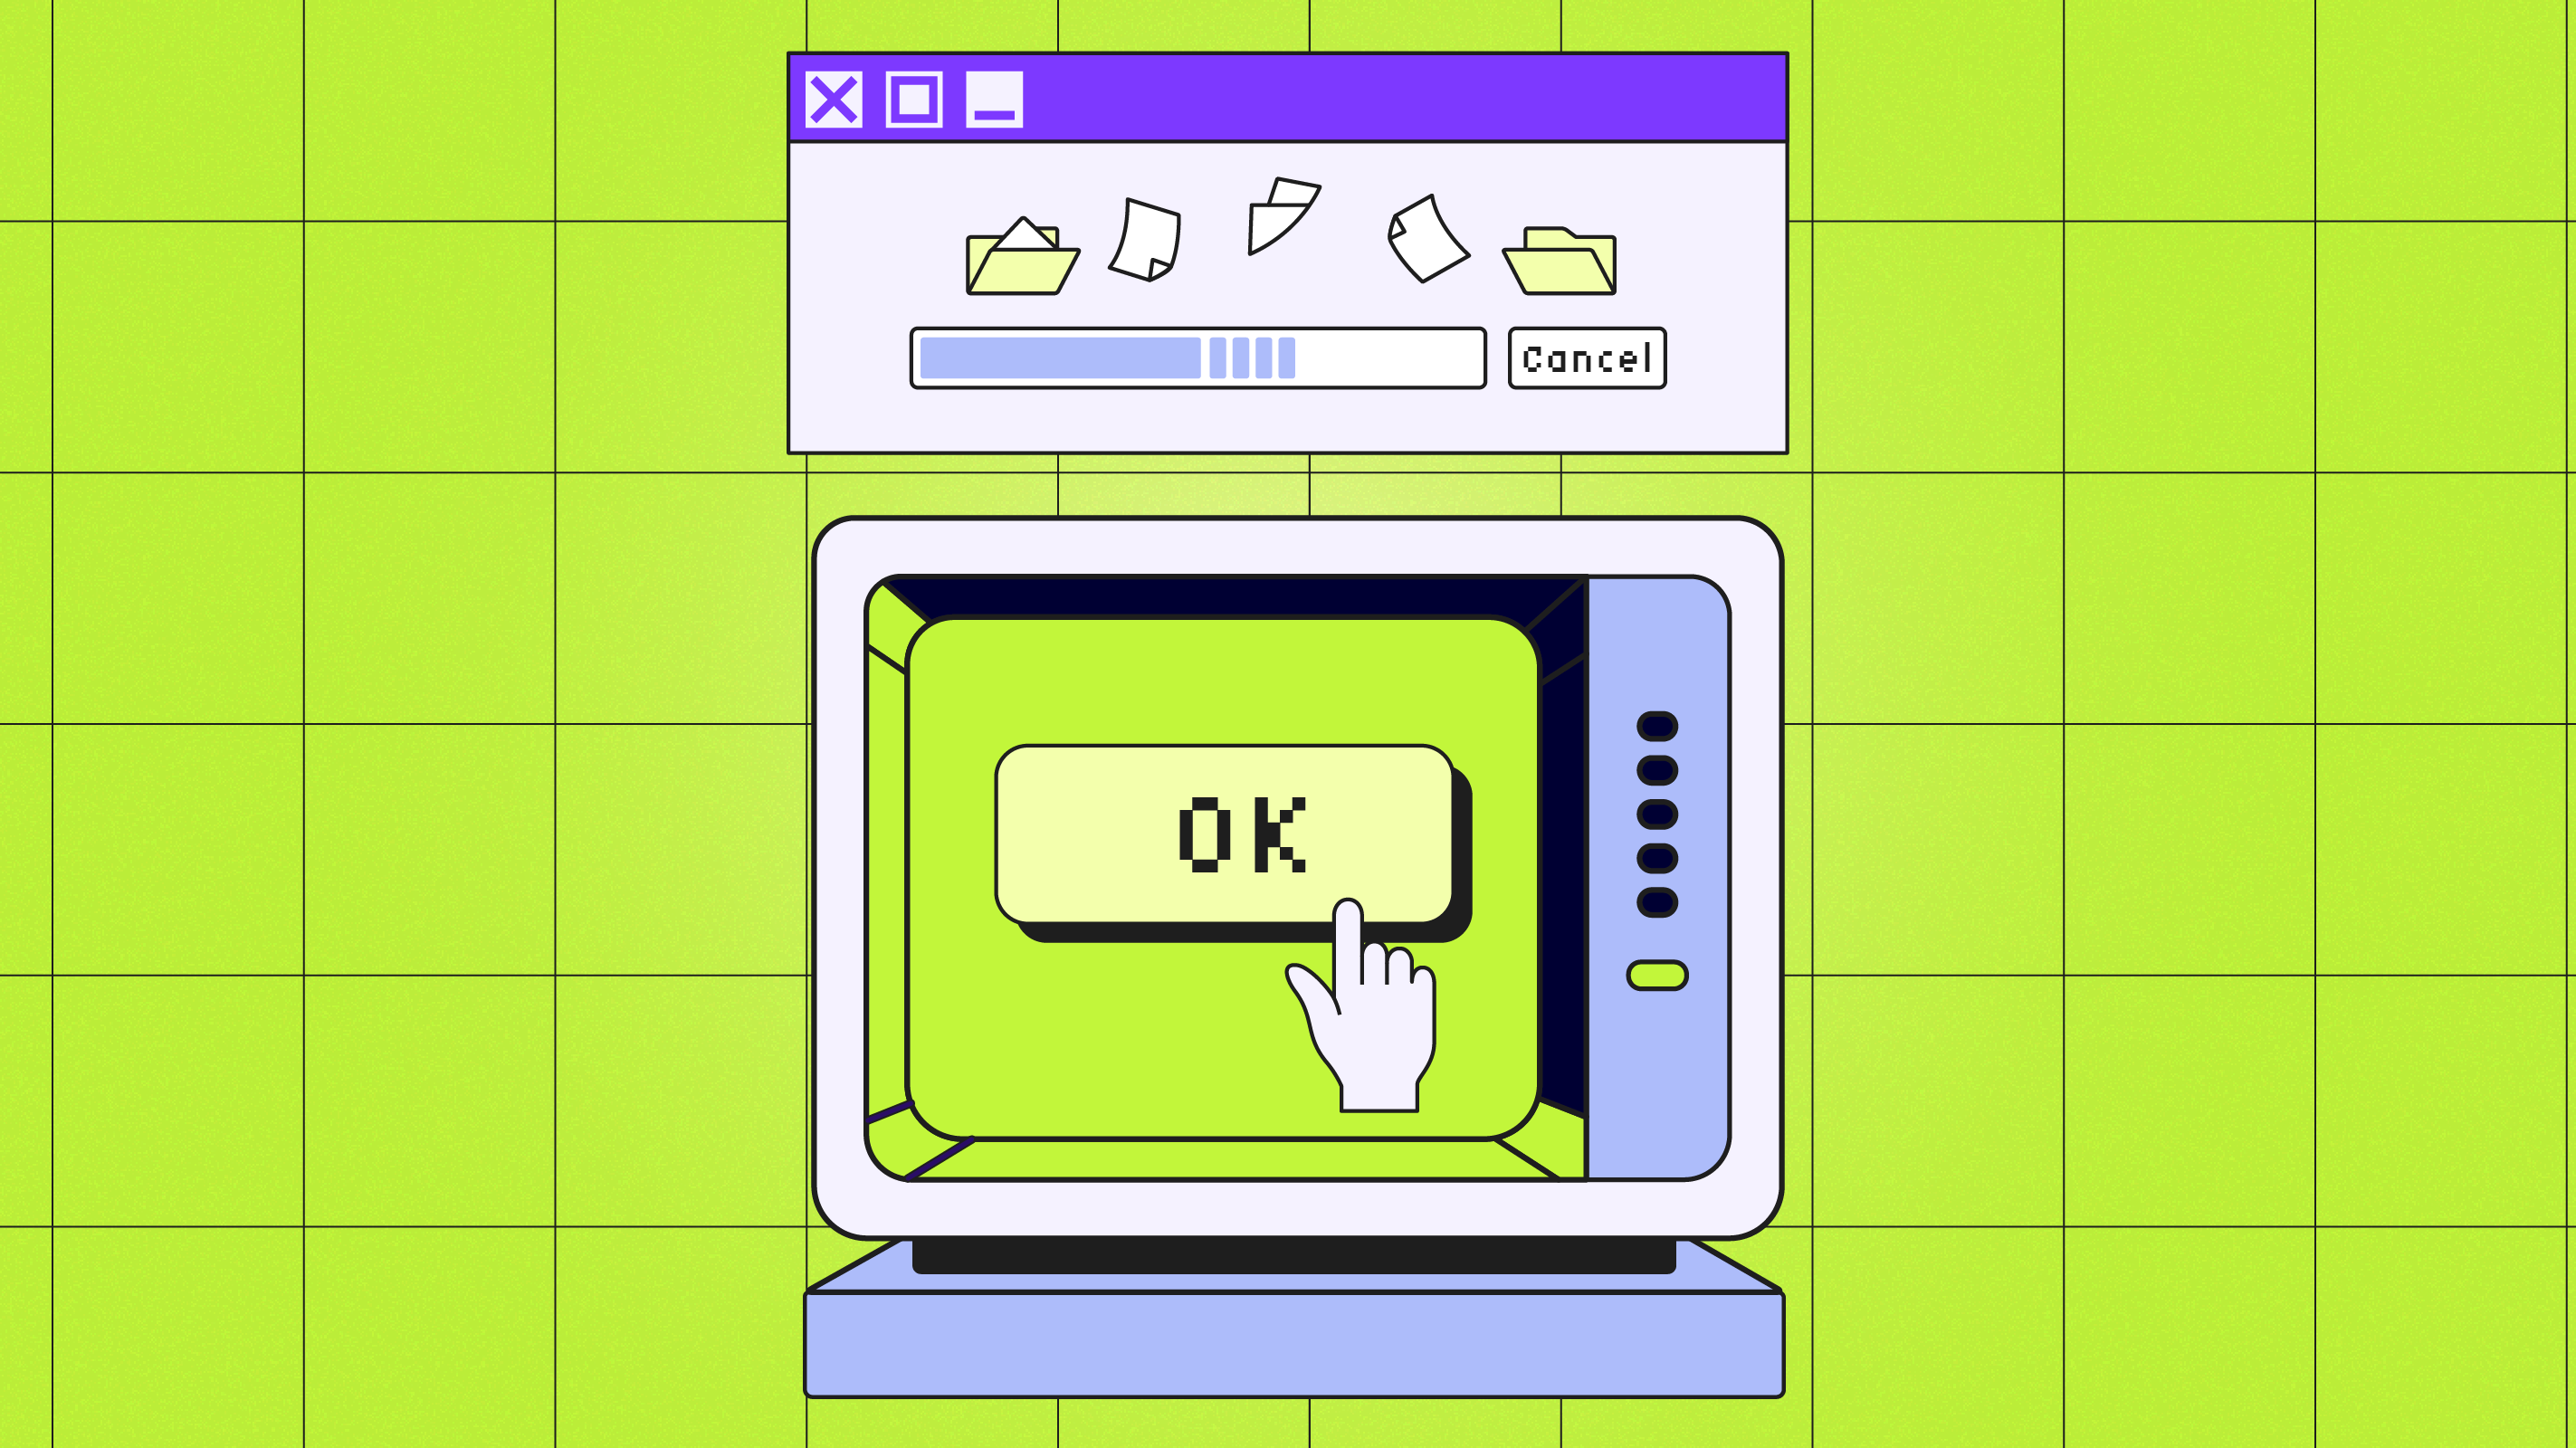 Image of finger clicking a button on a laptop computer screen to represent the benefits of cloud computing